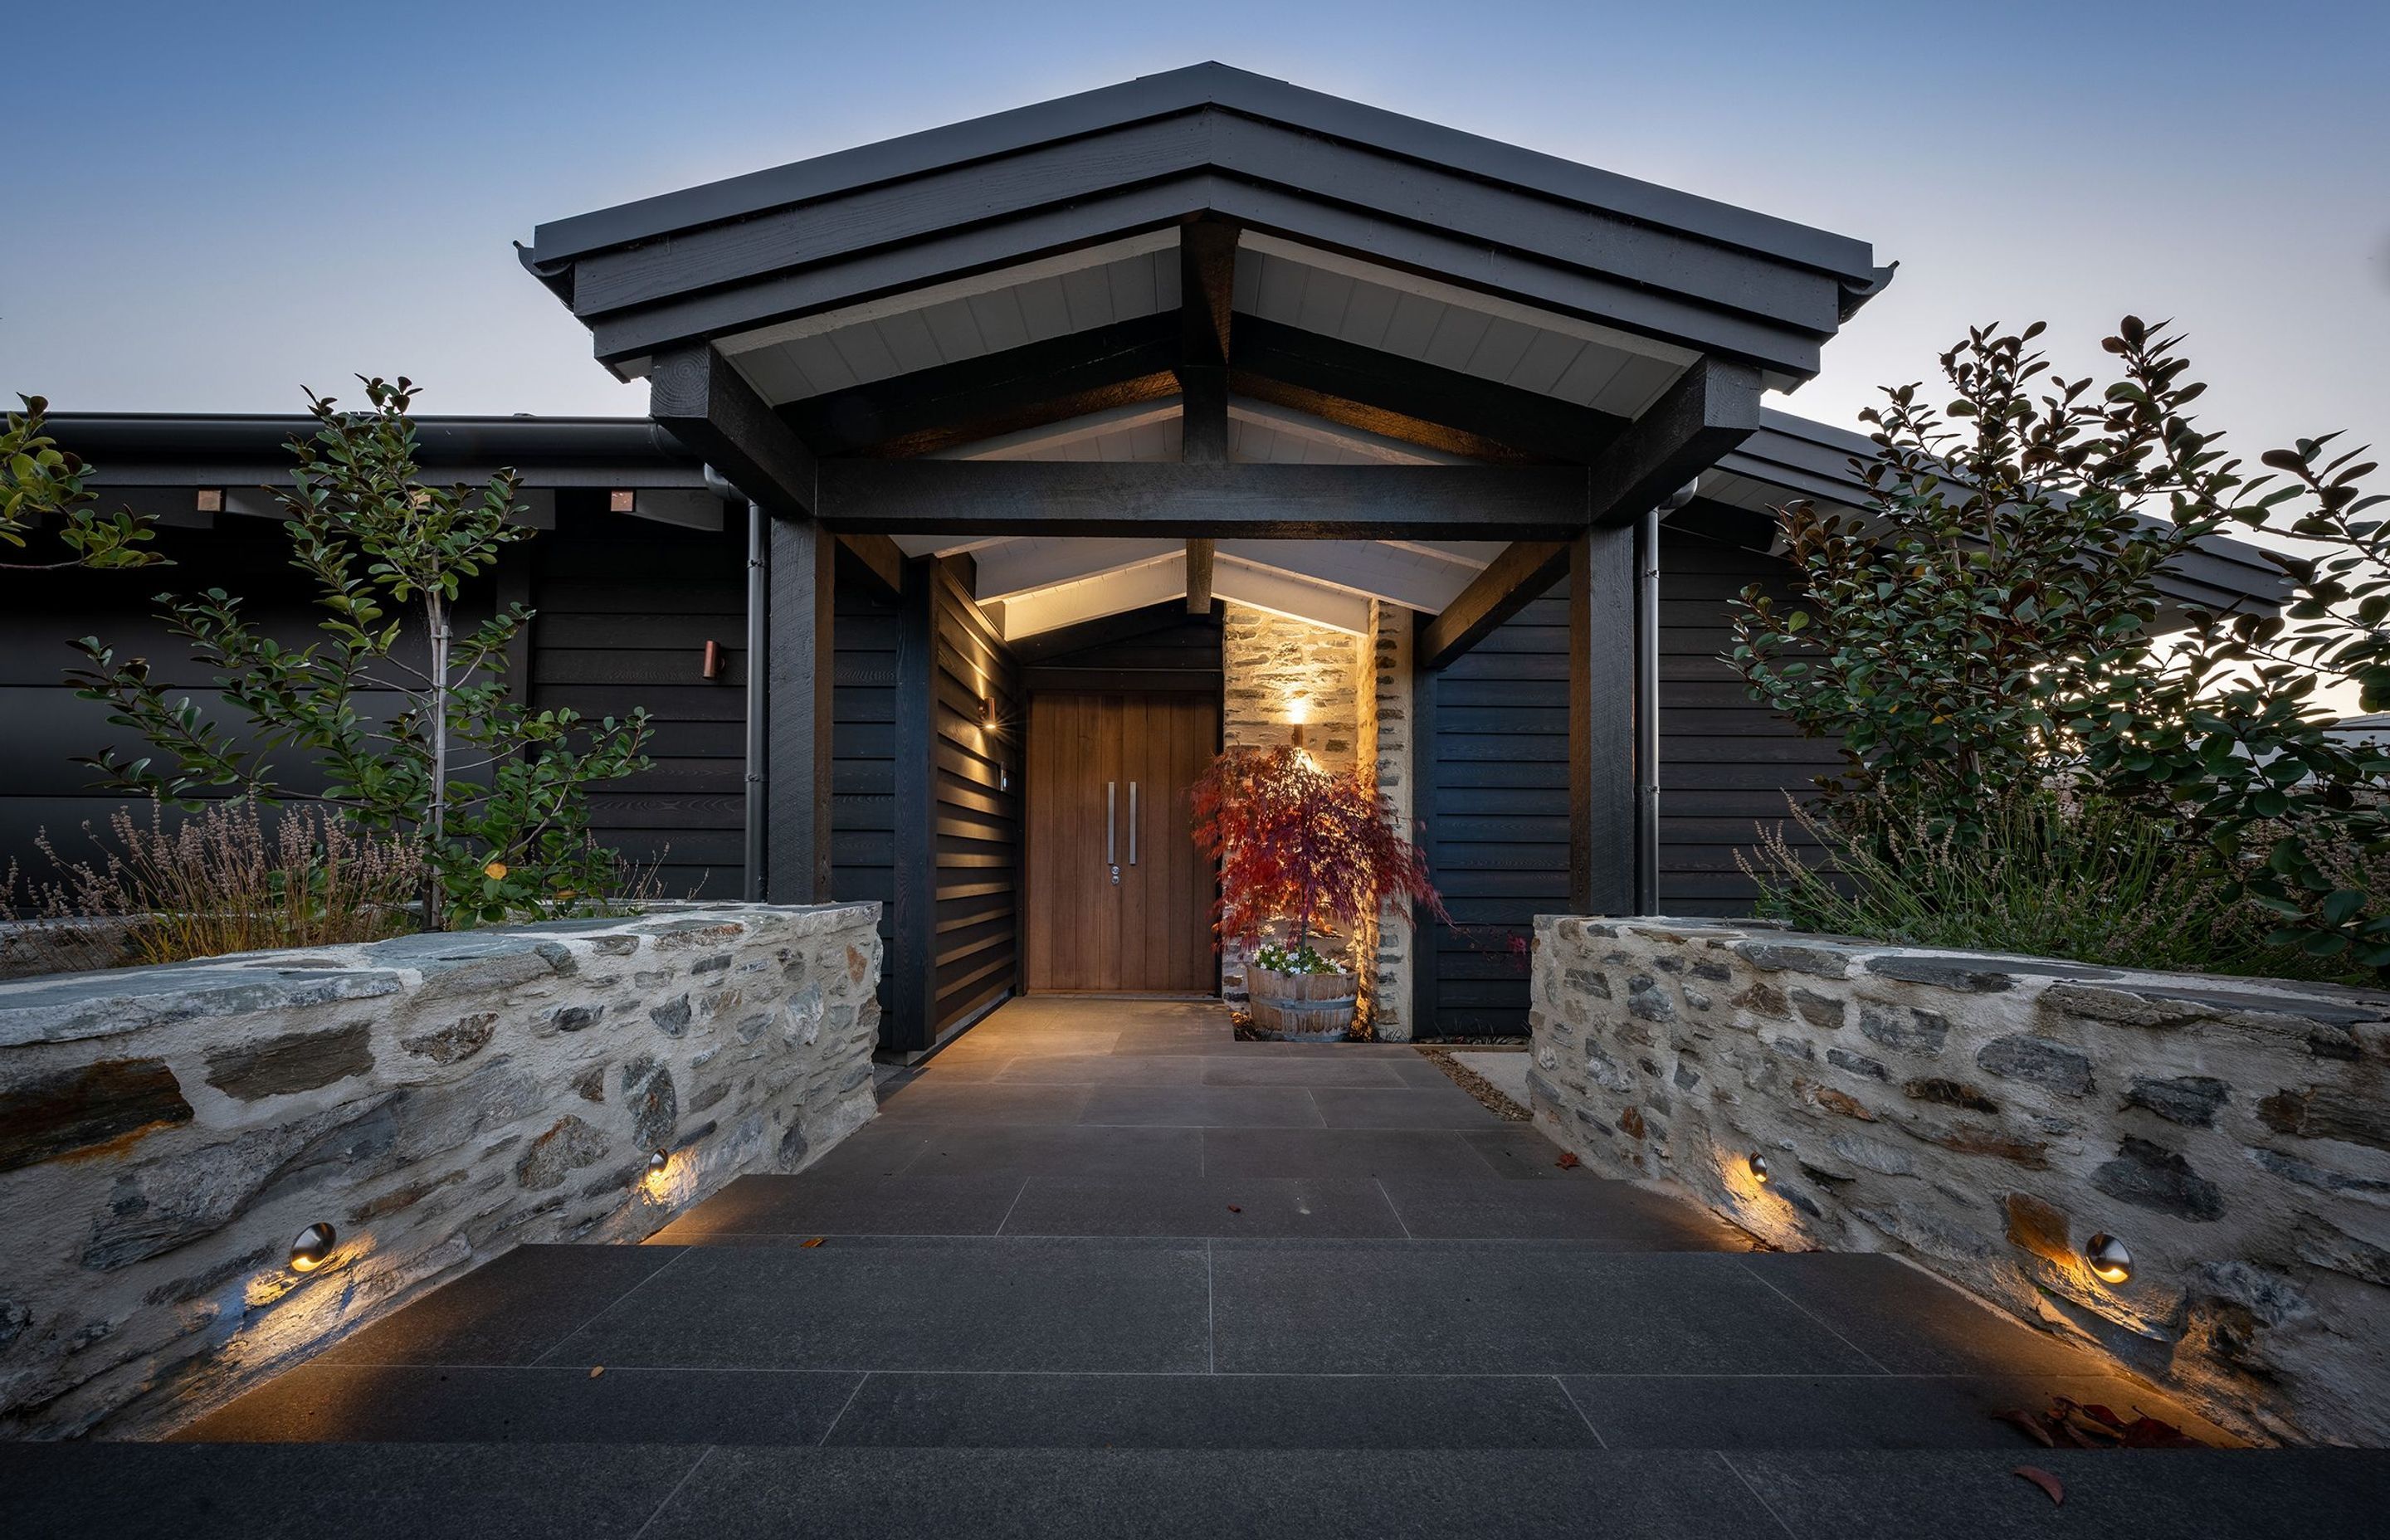 Dramatic in its colour scheme and bold materials, the solidity of the front of this home belies its almost total openness beyond the front door.